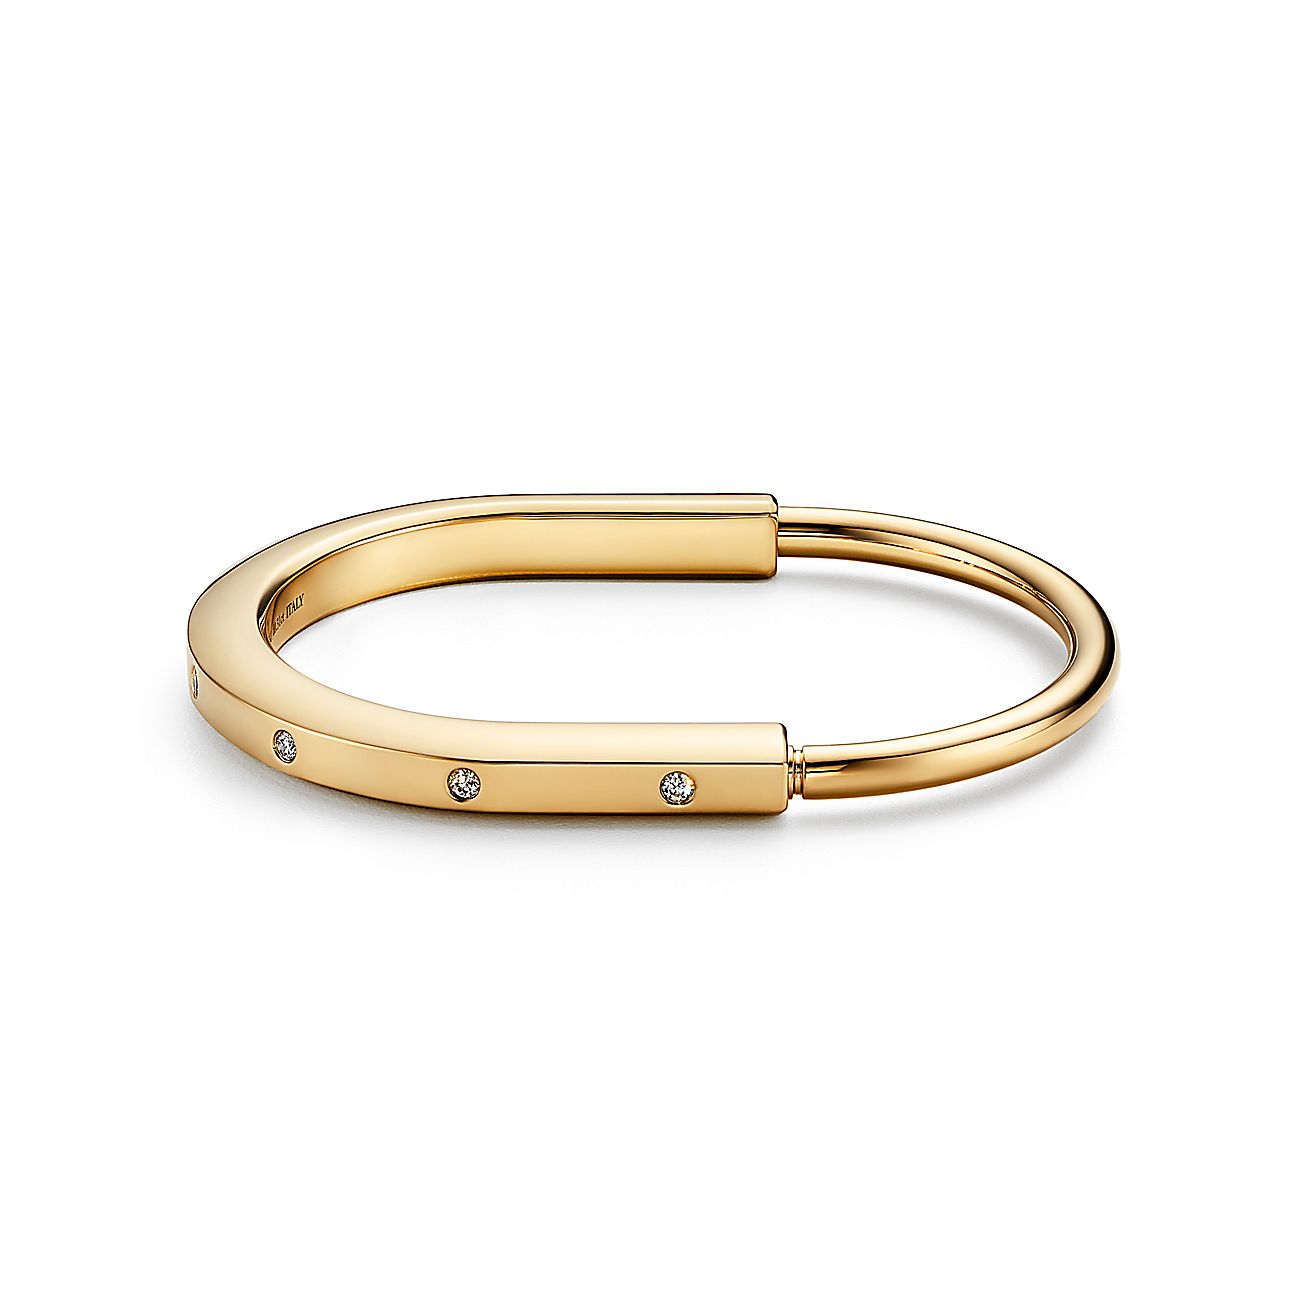 Tiffany Lock Bangle in Yellow Gold with Diamond Accents